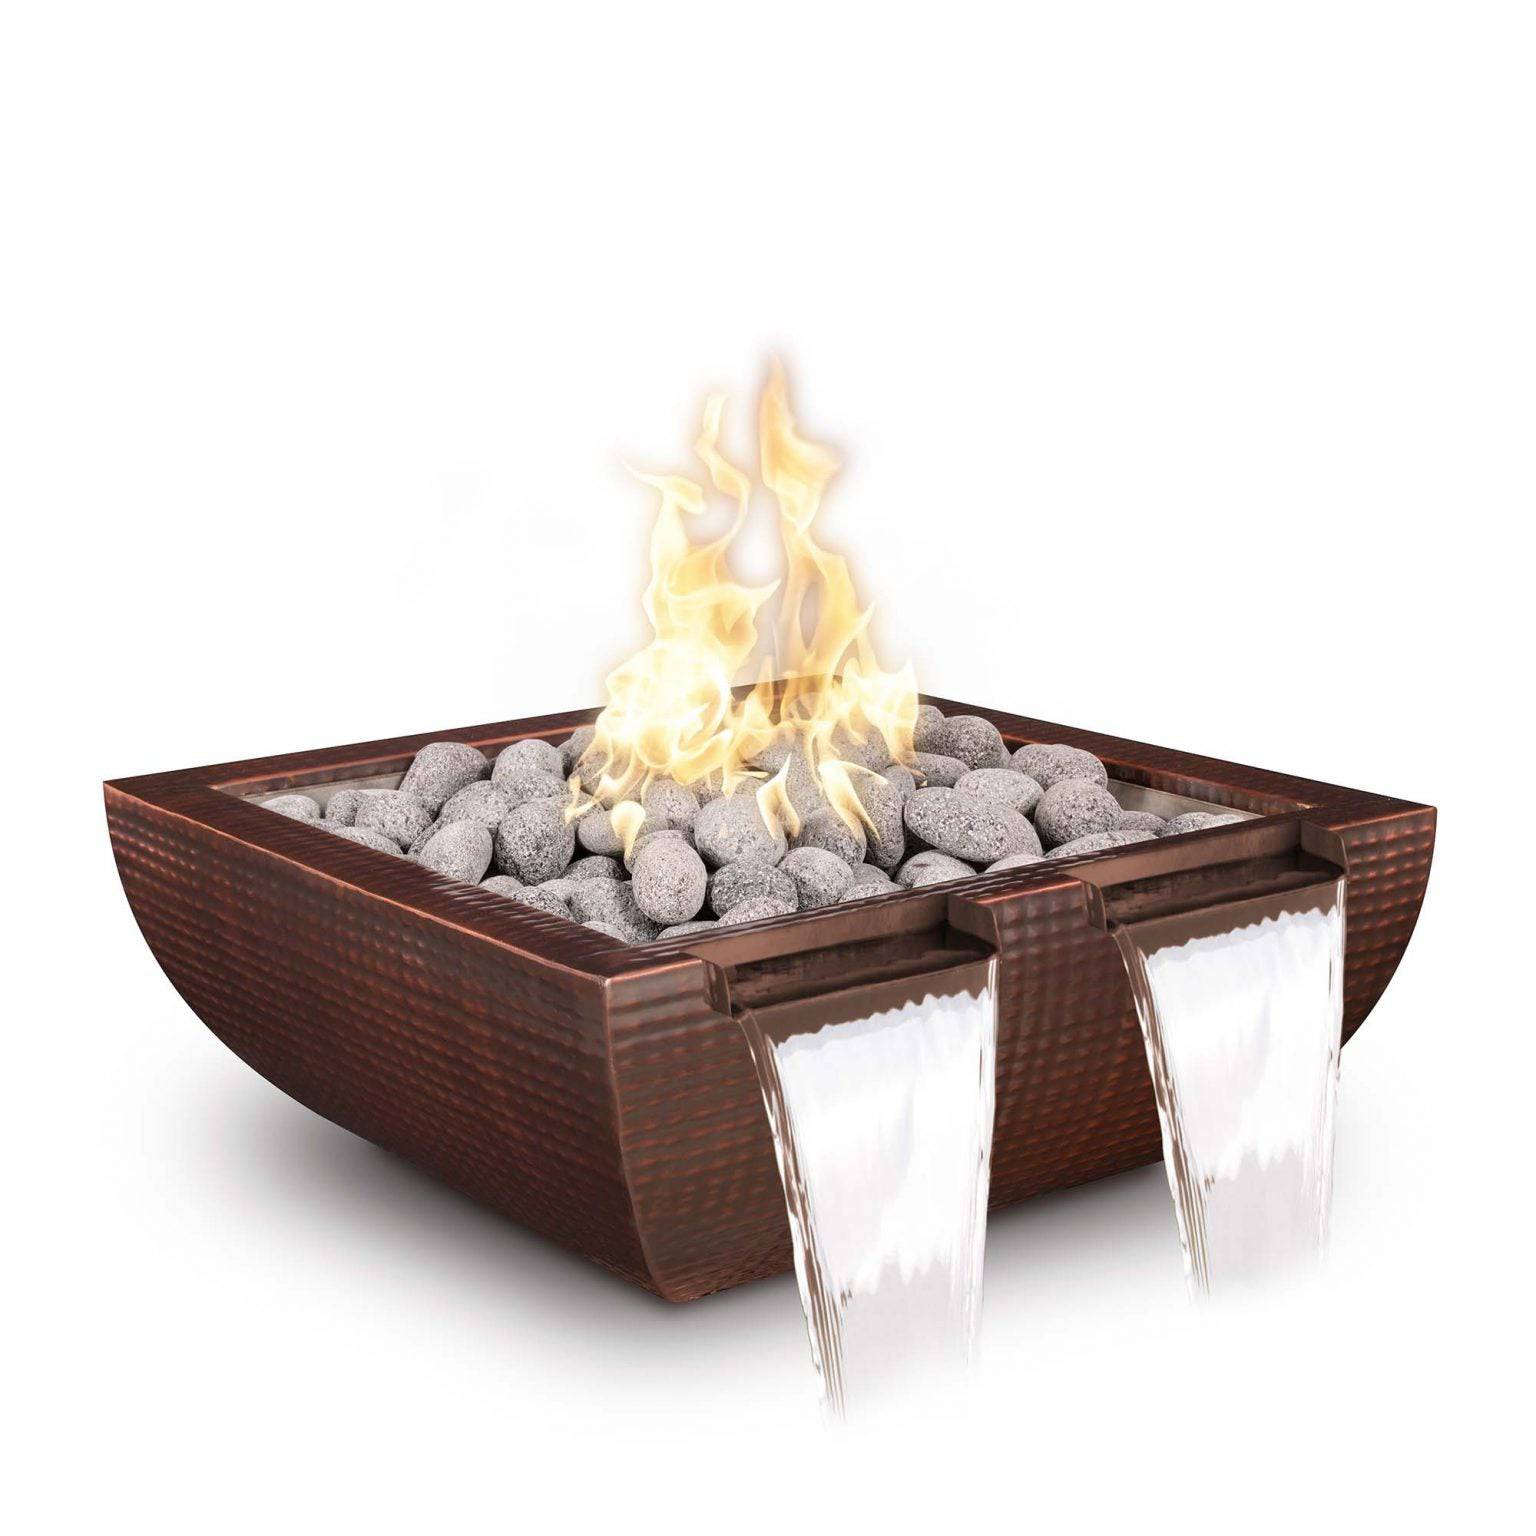 The Outdoor Plus Avalon Fire & Water Bowl Twin Spill Stainless Steel OPT-XXAVSSFWTS - Serenity Provision